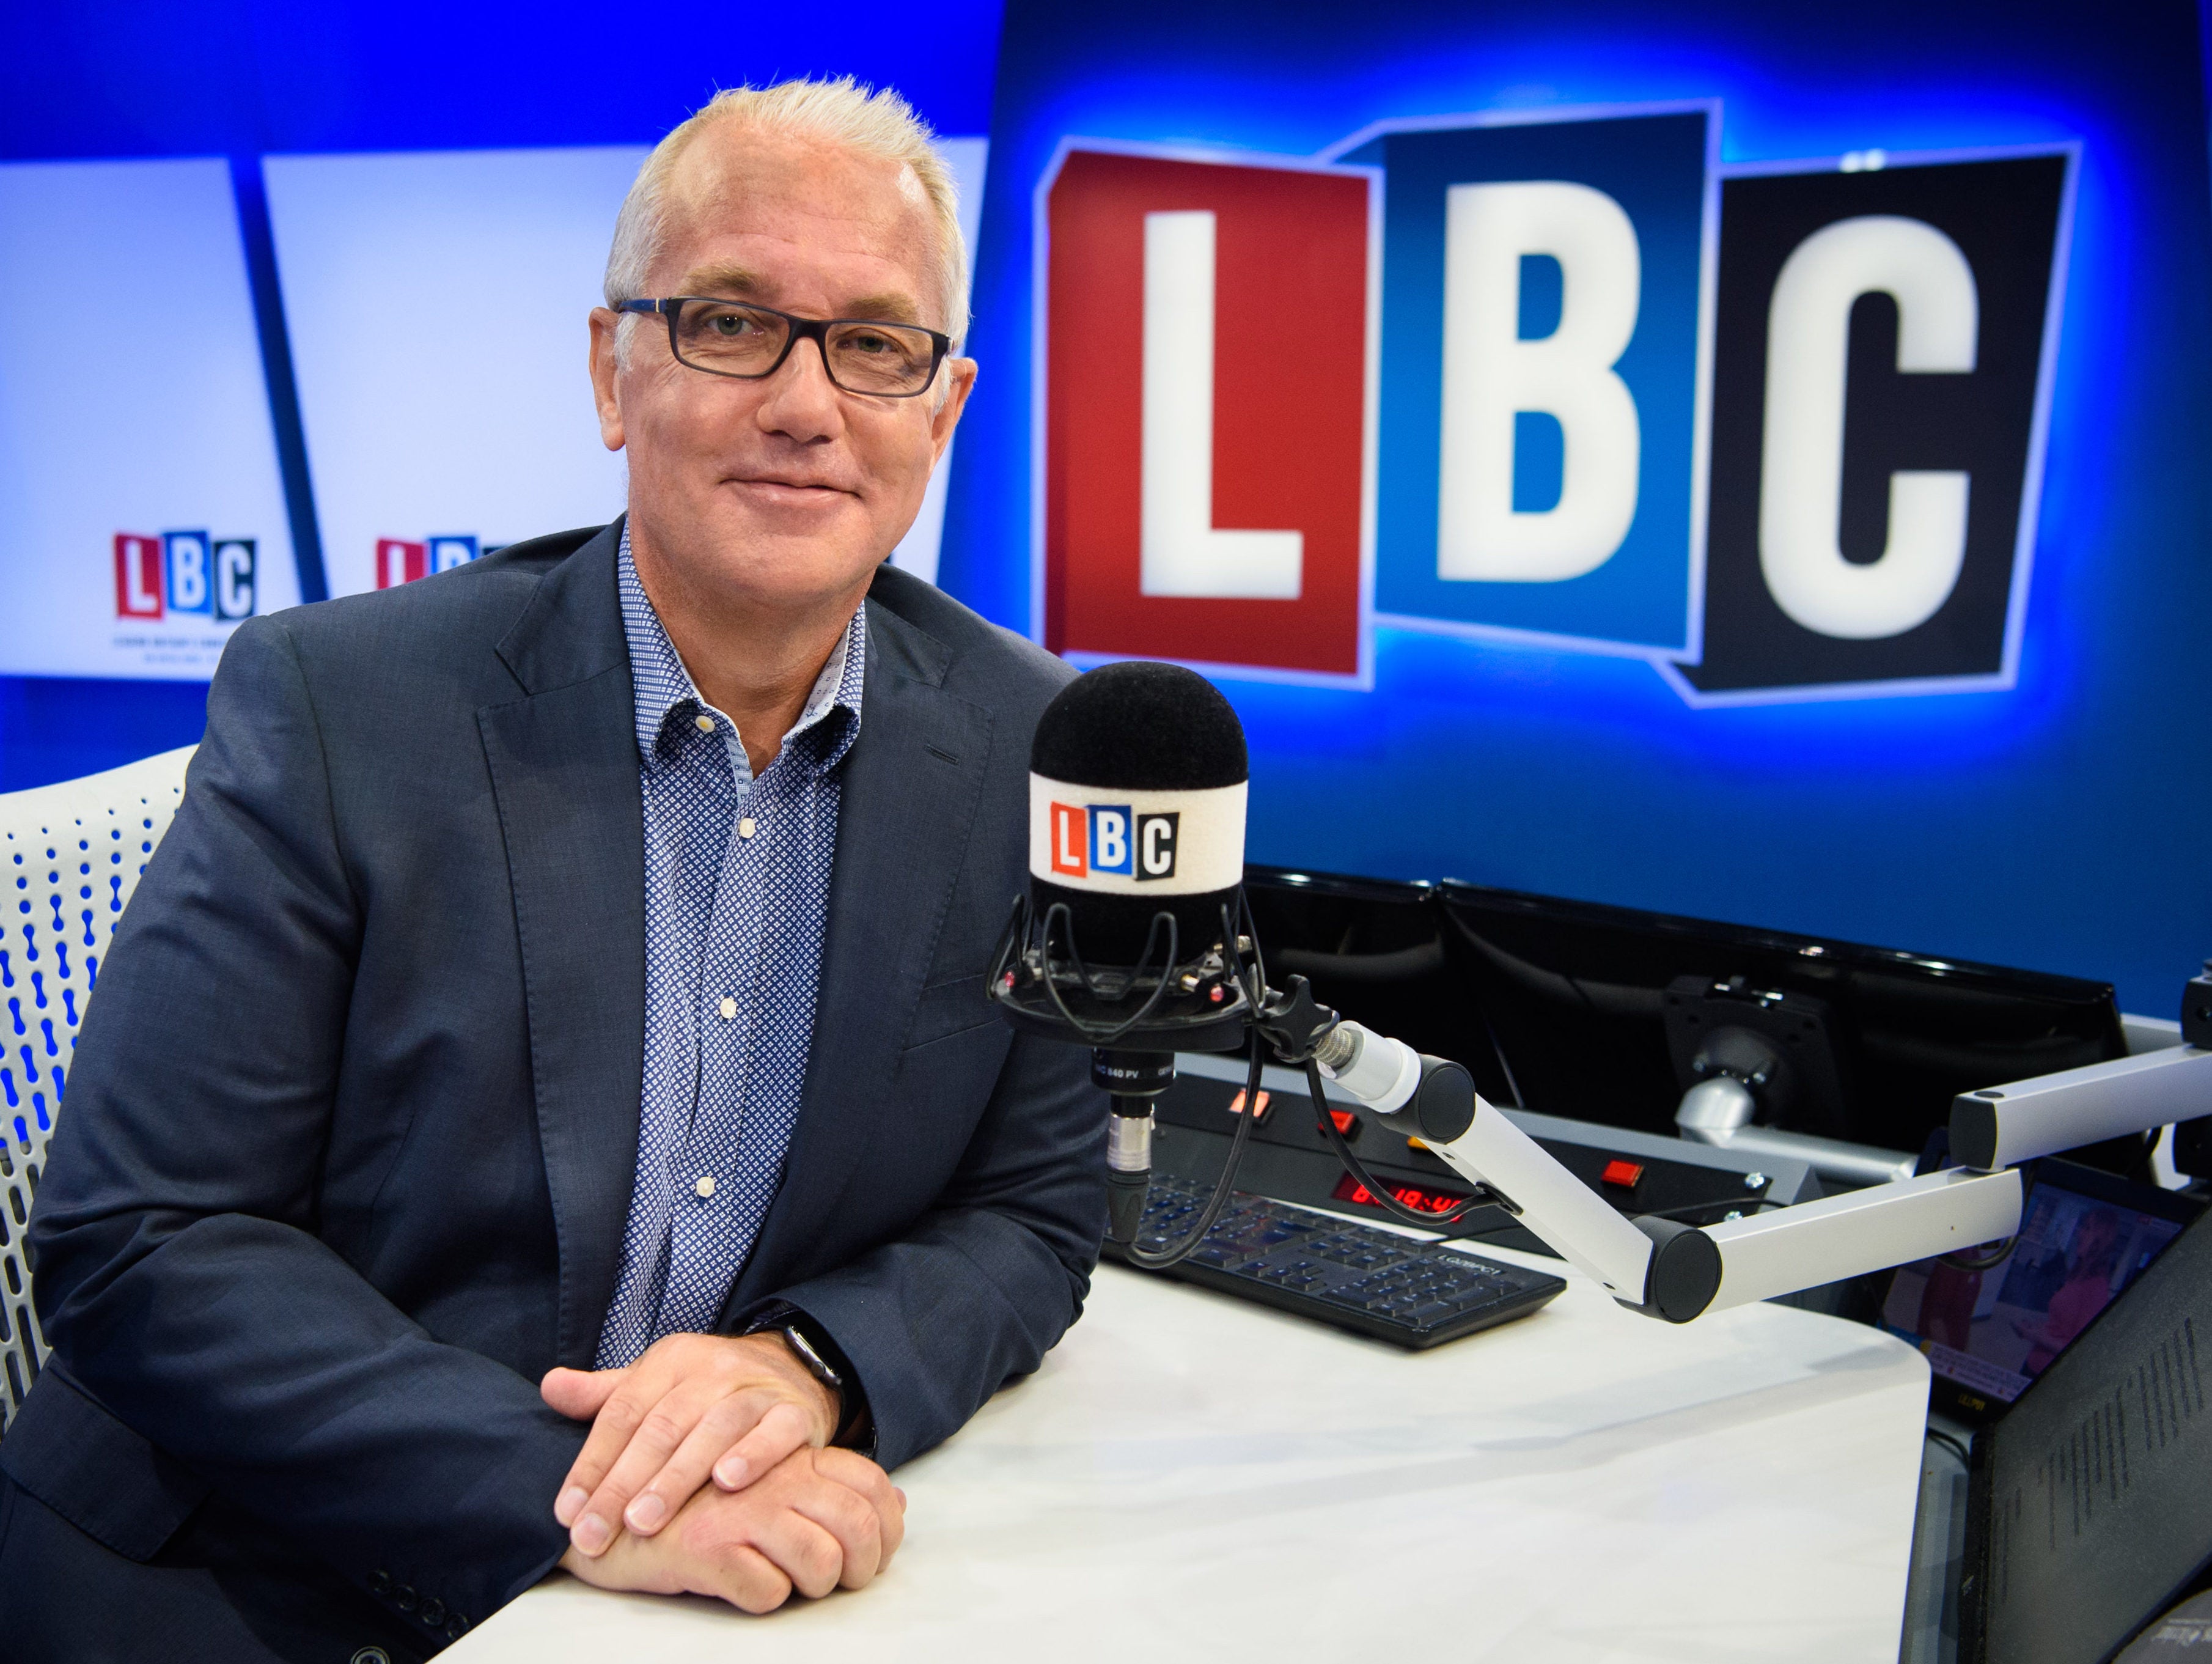 PM presenter Eddie Mair leaving BBC after 30 years to join LBC talk radio